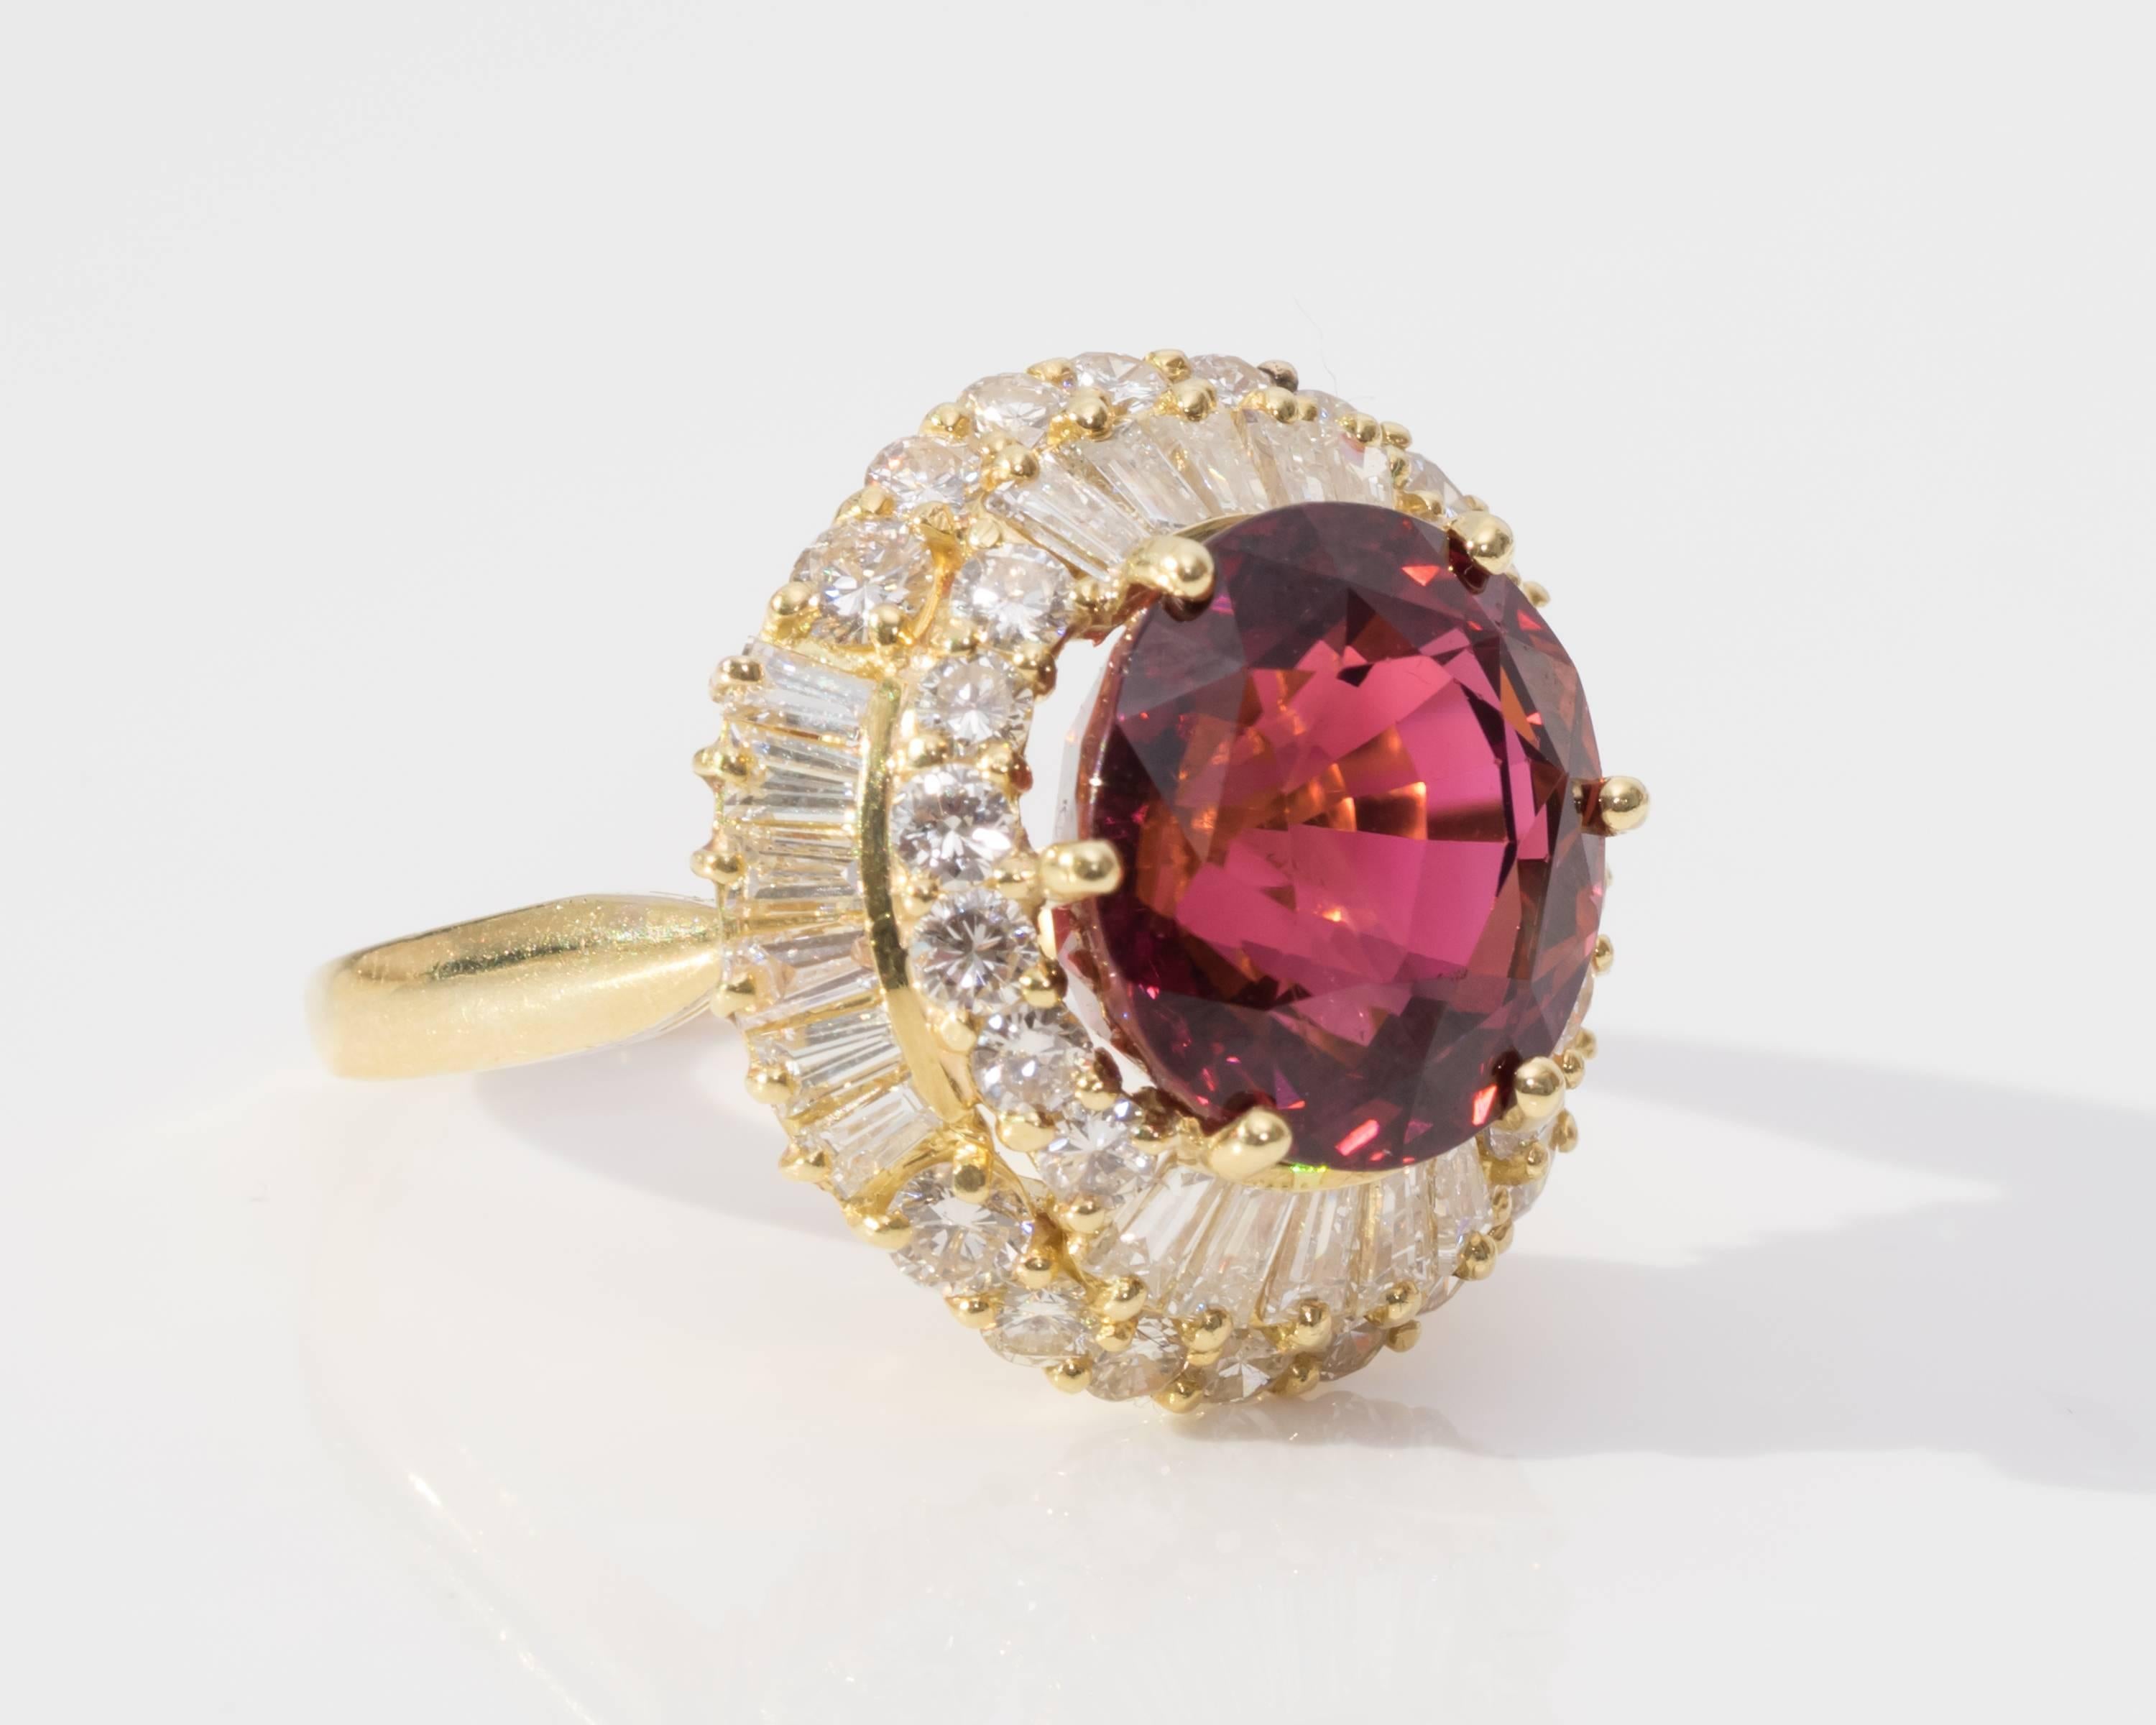 Beautiful Ornate Cocktail Ring 
Features 5 Carat Tourmaline, Vivid Colors Purplish/Pink/Red Hues
Features over 4 Carats Total Weight of Diamonds, H/I Color, VS-SI Clarity
Diamonds are a mix of Baguette Cuts and Round Brilliant Cuts
All Diamonds are